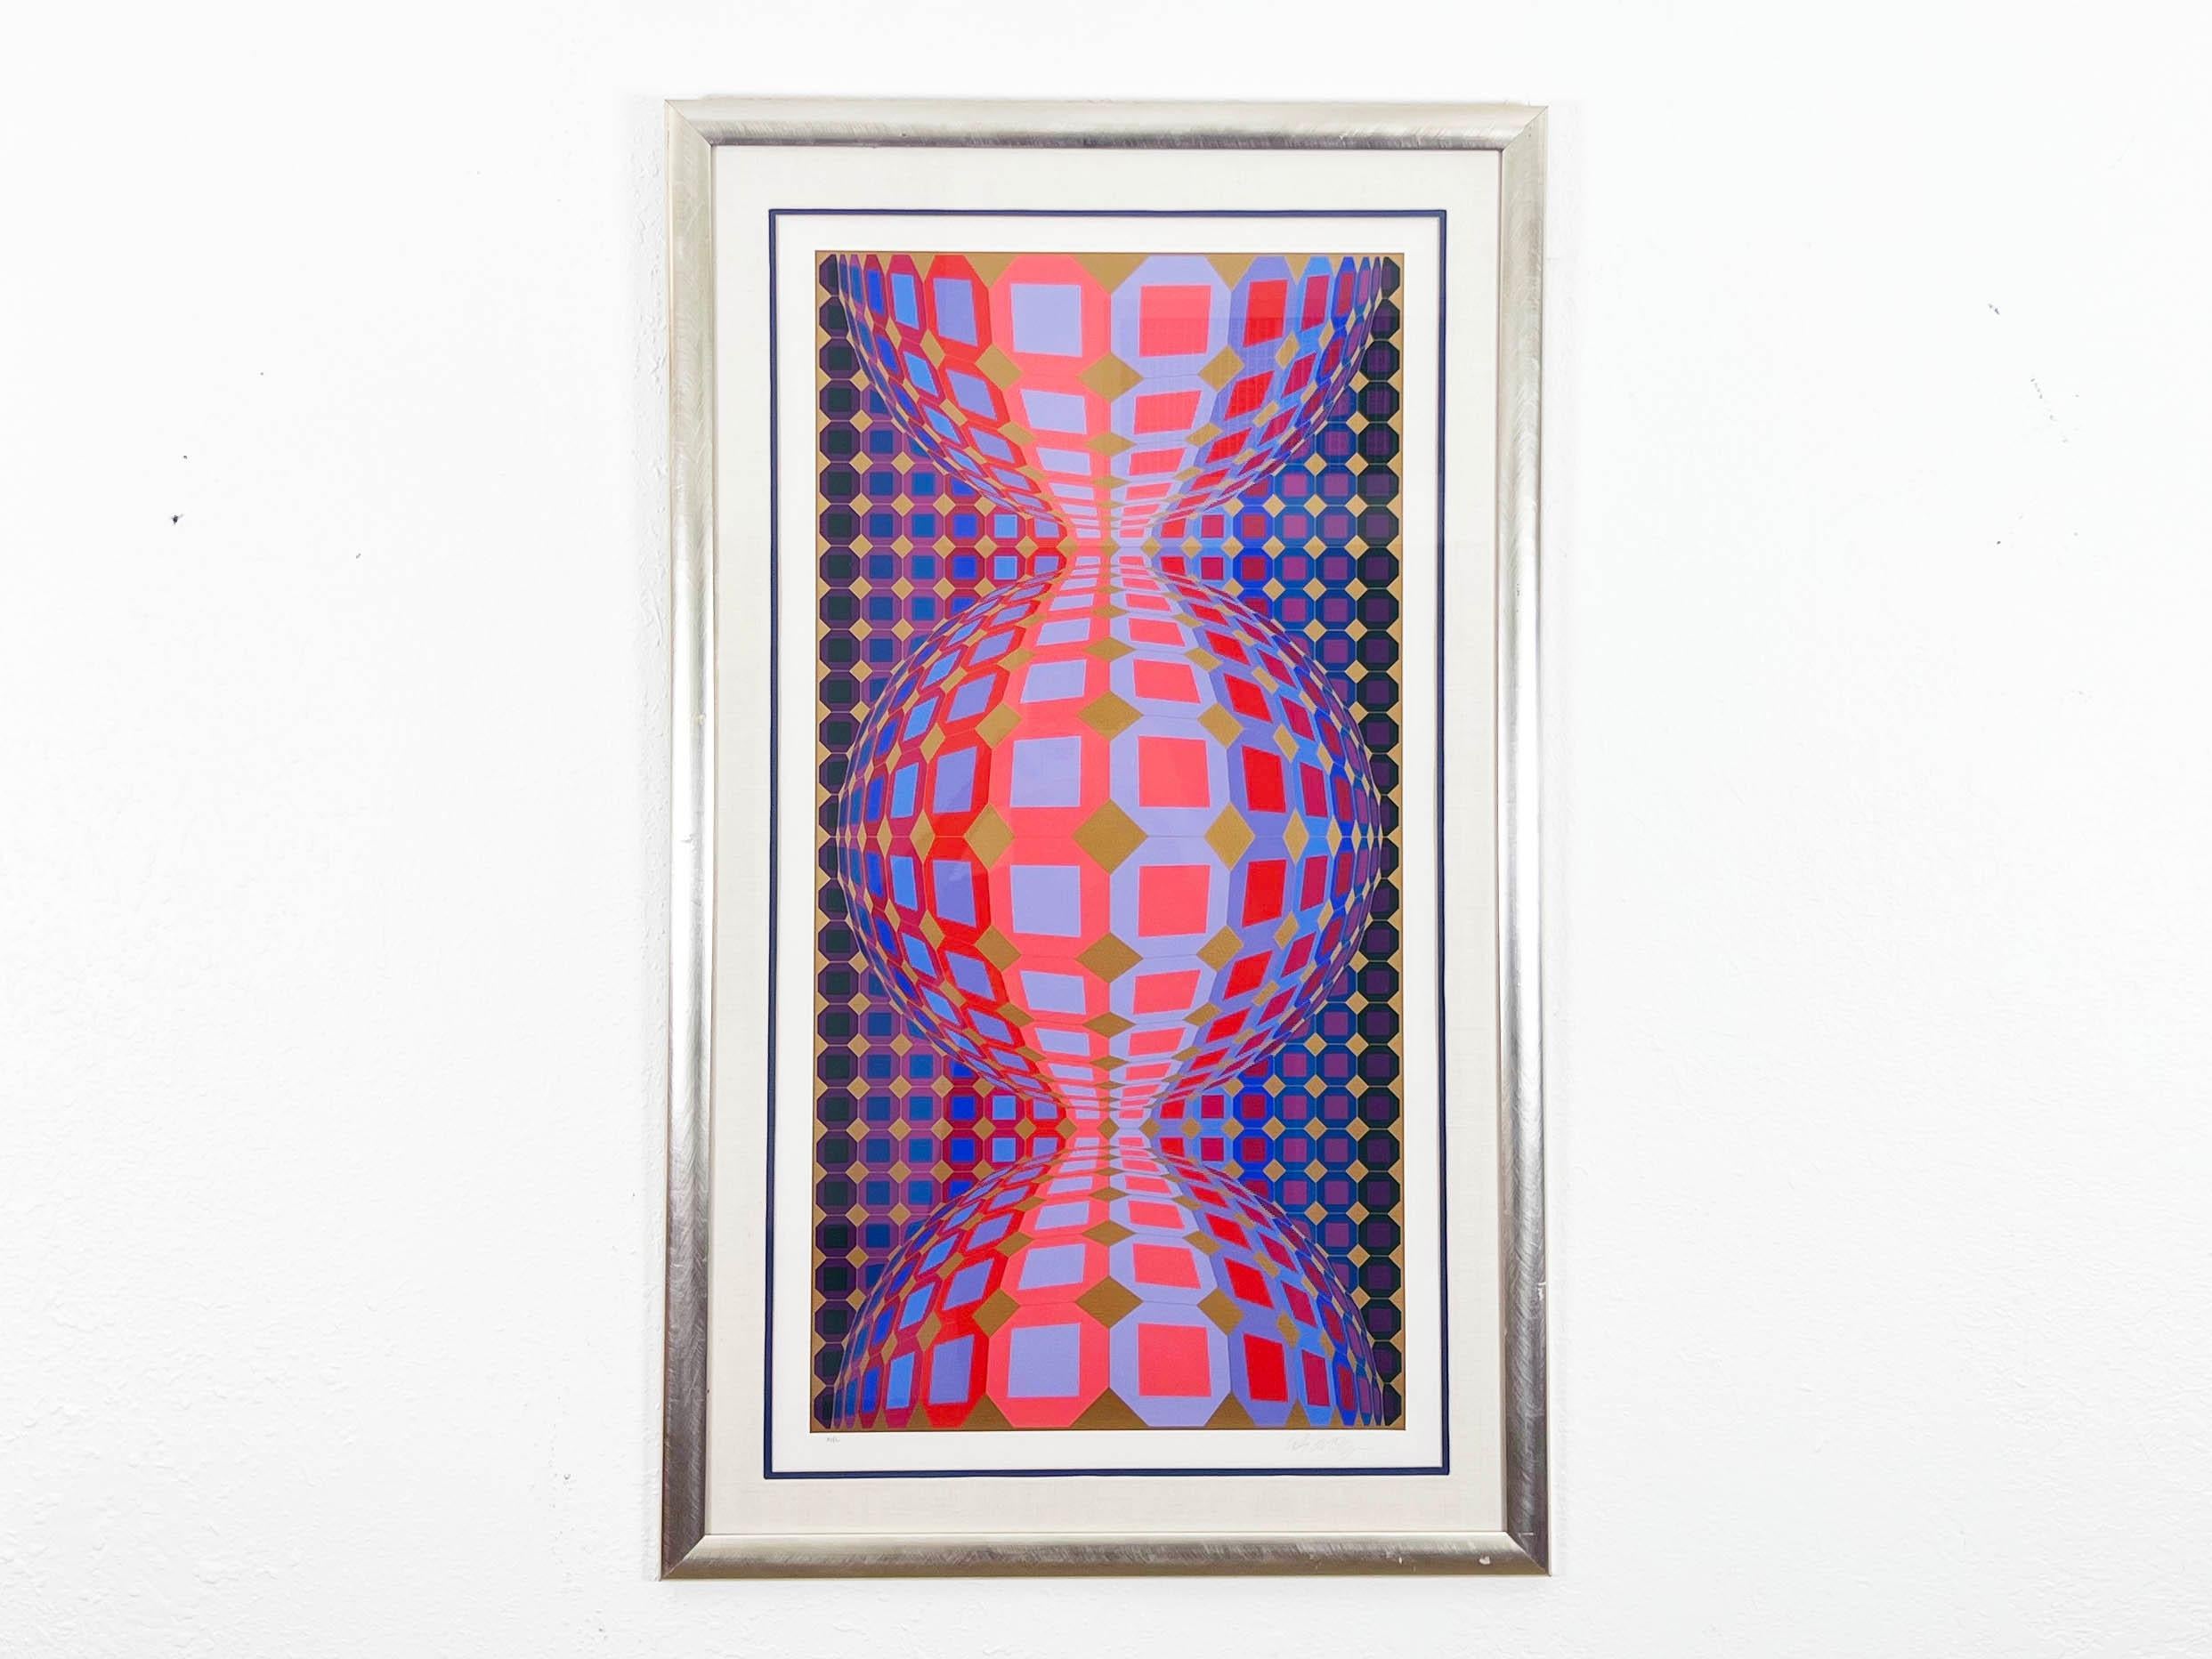 Original limited edition serigraph screenprint by Victor Vasarely titled 